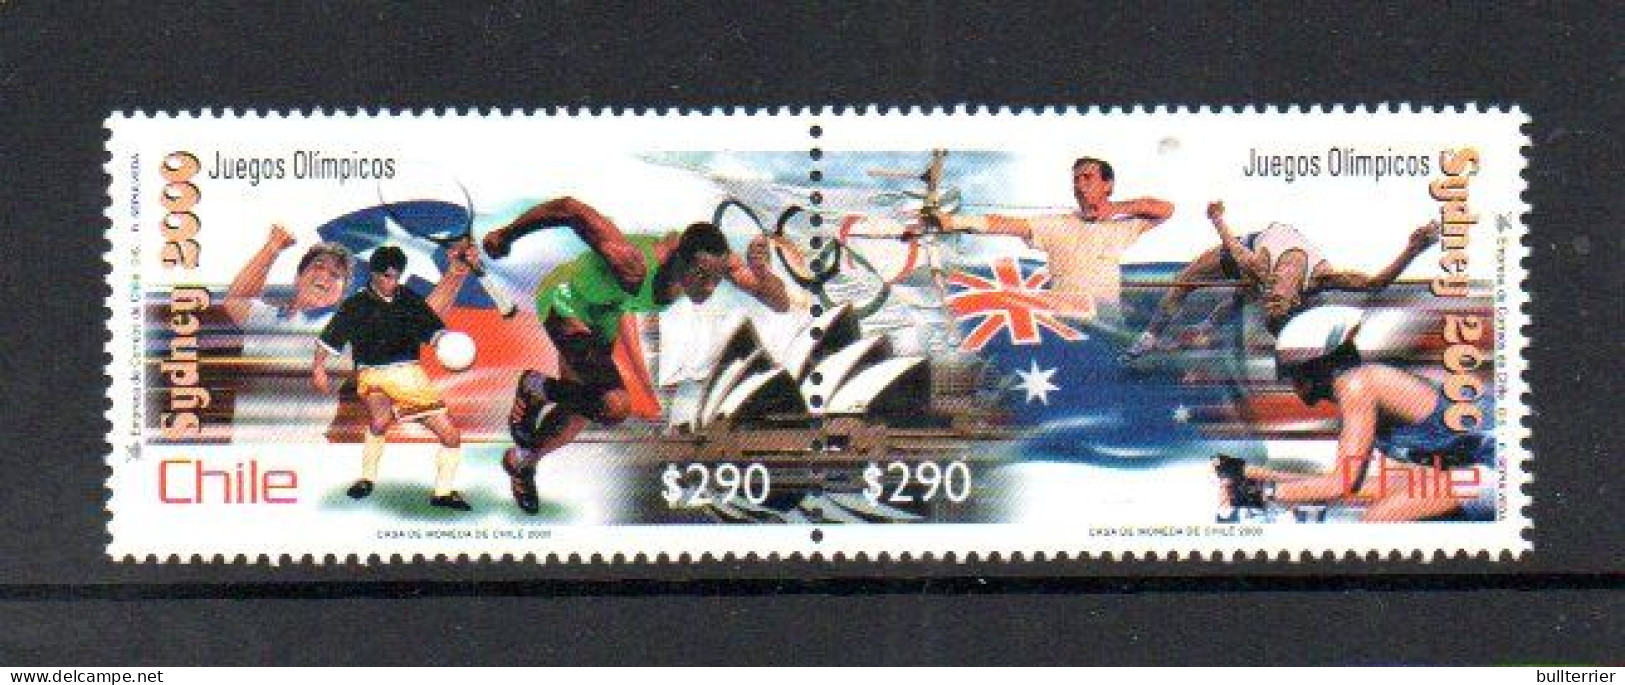 OLYMPICS - CHILE   -  2000 SYDNEY OLYMPICS SET OF 2 IN PAIR   MINT NEVER HINGED - Summer 2000: Sydney